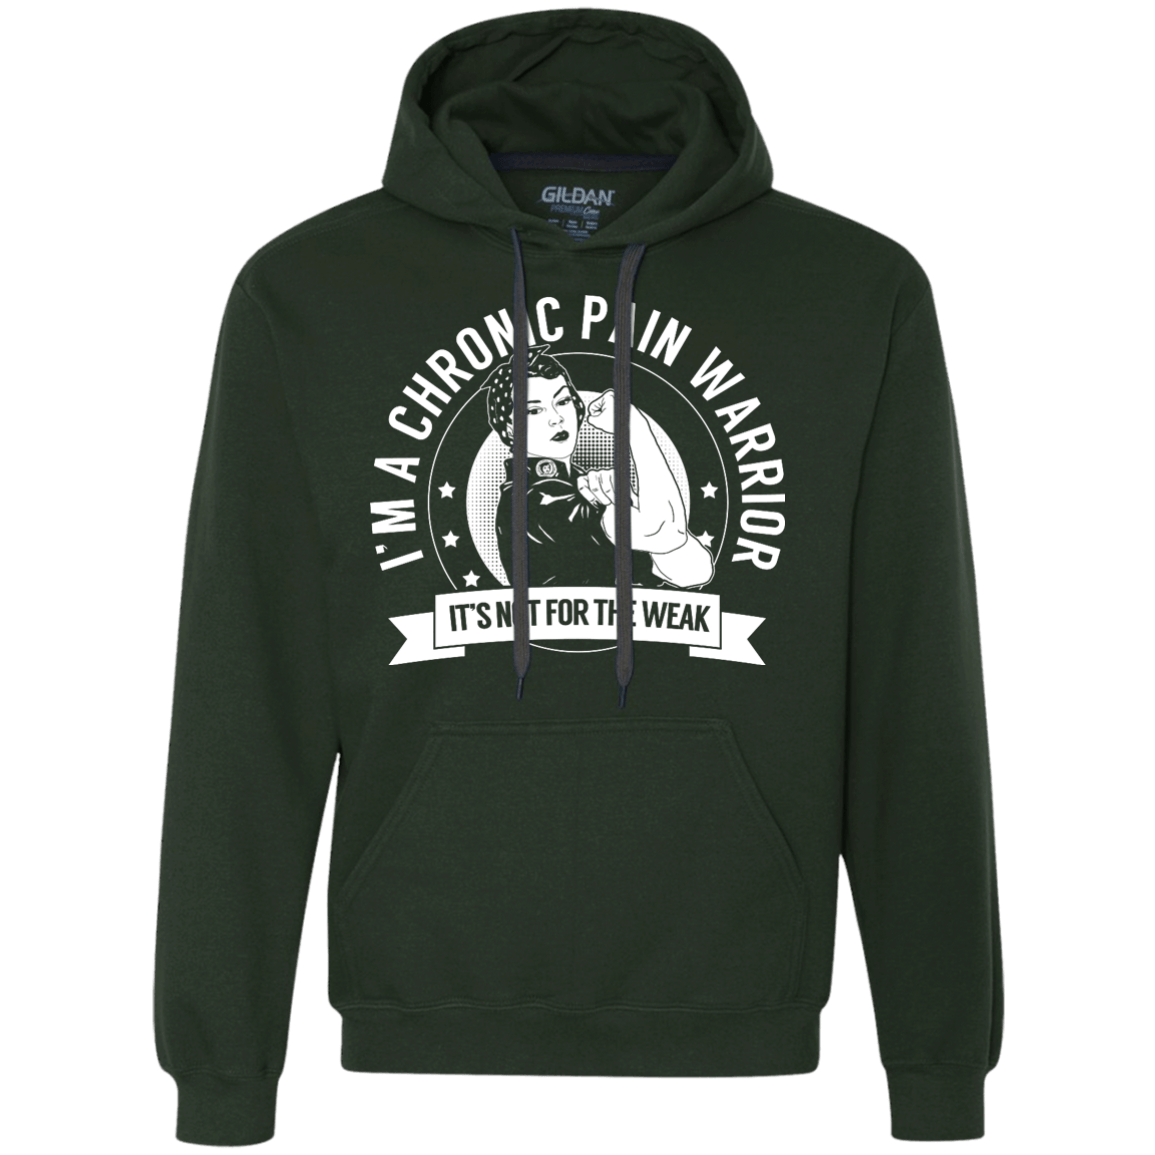 Chronic Pain Warrior Not For The Weak Pullover Hoodie - The Unchargeables